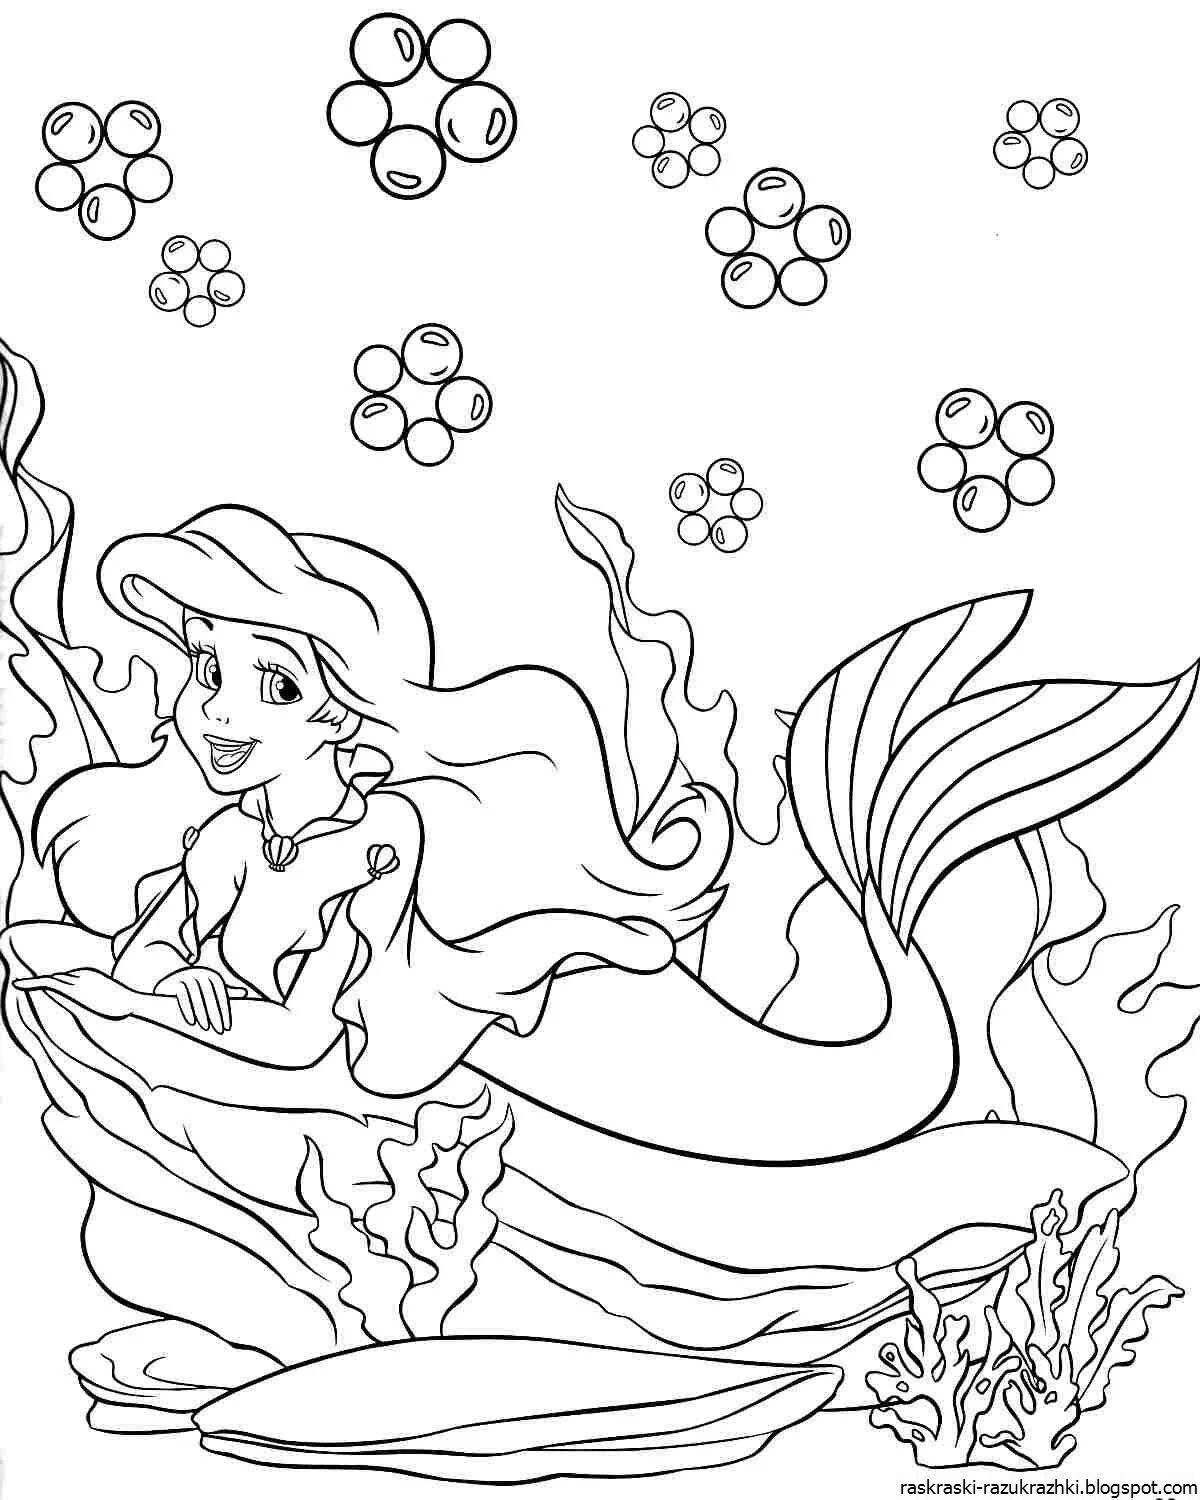 Gorgeous little mermaid coloring book for girls